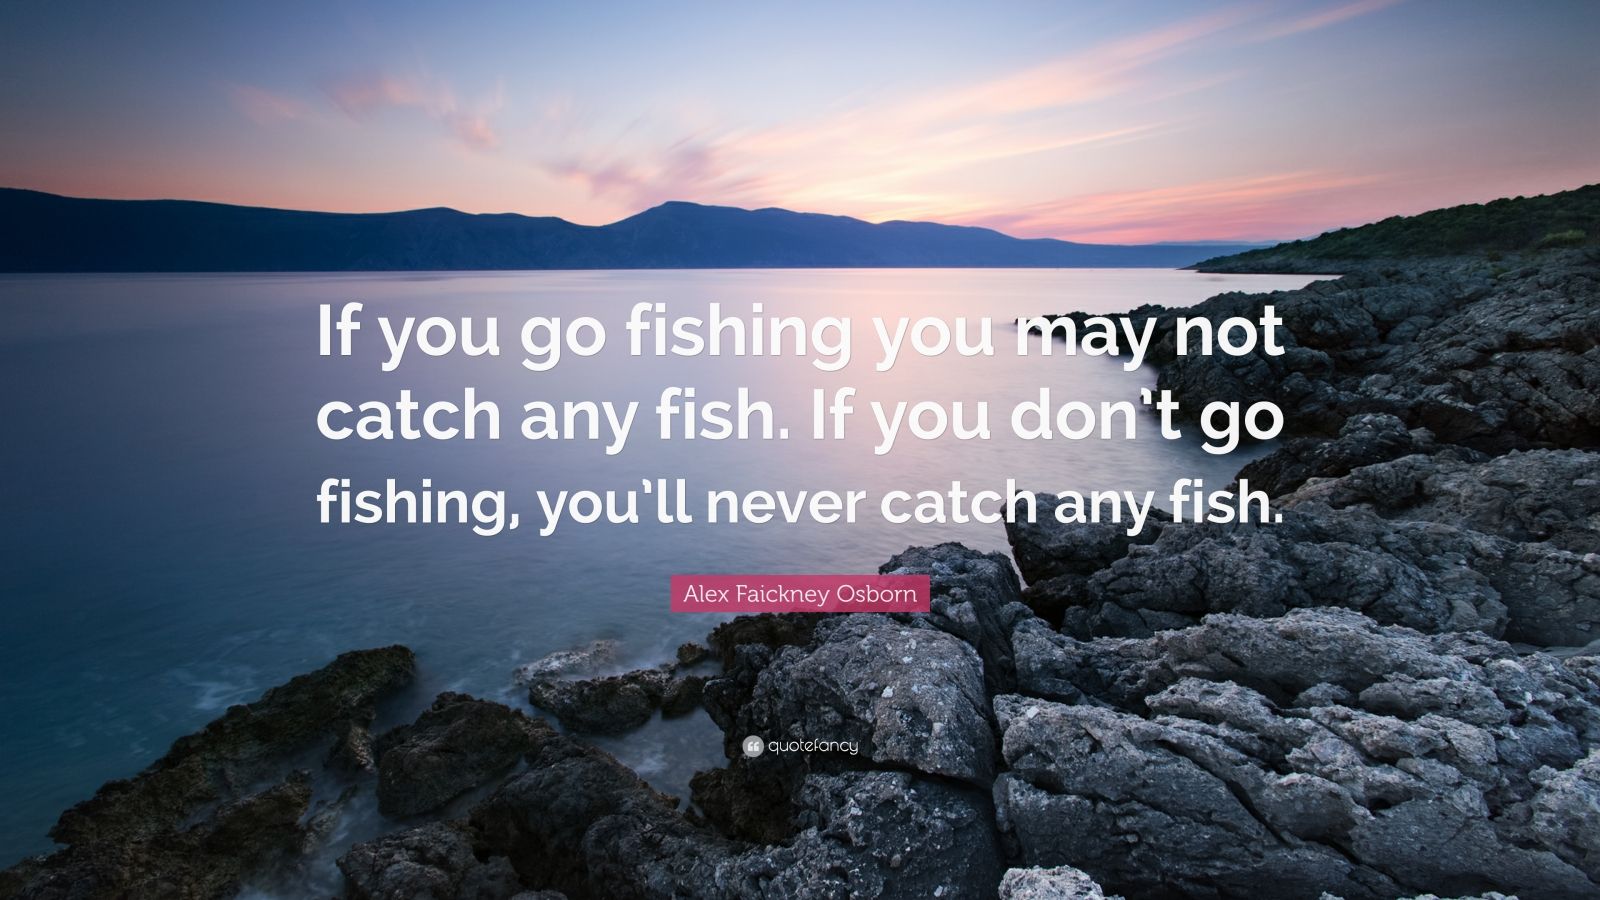 Alex Faickney Osborn Quote: “If you go fishing you may not catch